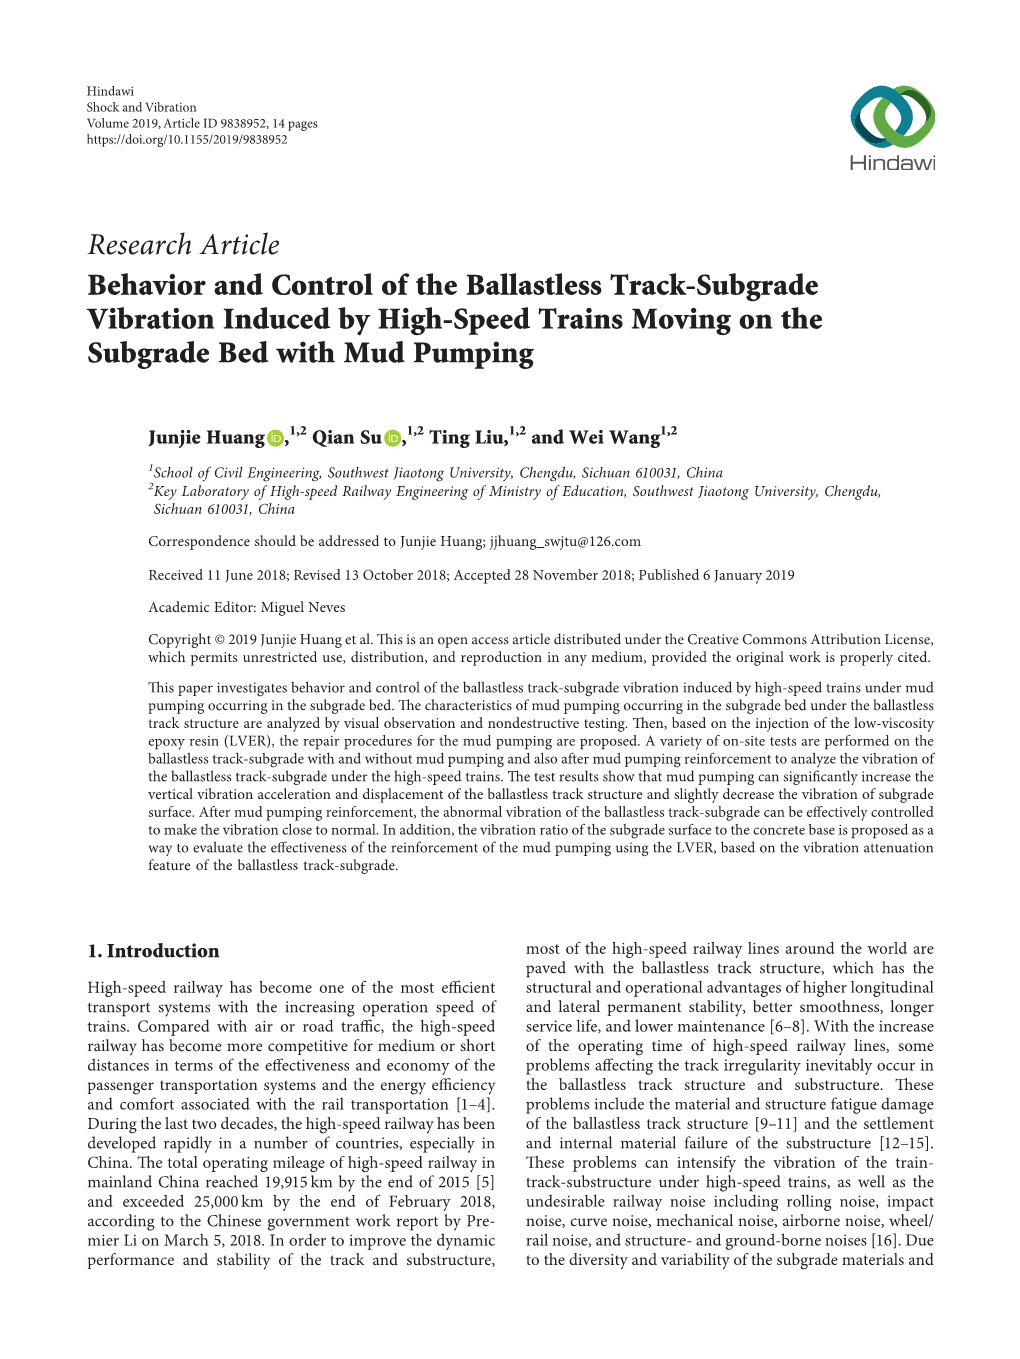 Behavior and Control of the Ballastless Track-Subgrade Vibration Induced by High-Speed Trains Moving on the Subgrade Bed with Mud Pumping